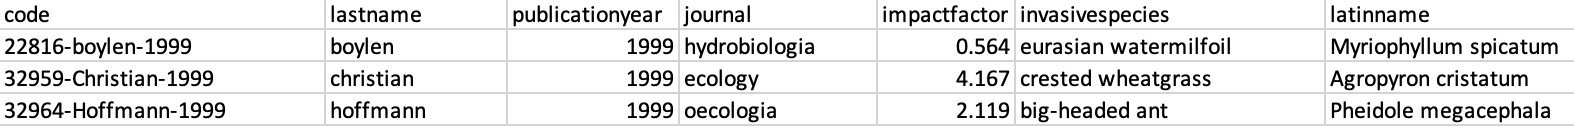 A small selection of a data extraction spreadsheet that includes headings such as 'author last name', 'publication year' and 'invasive species common name'.